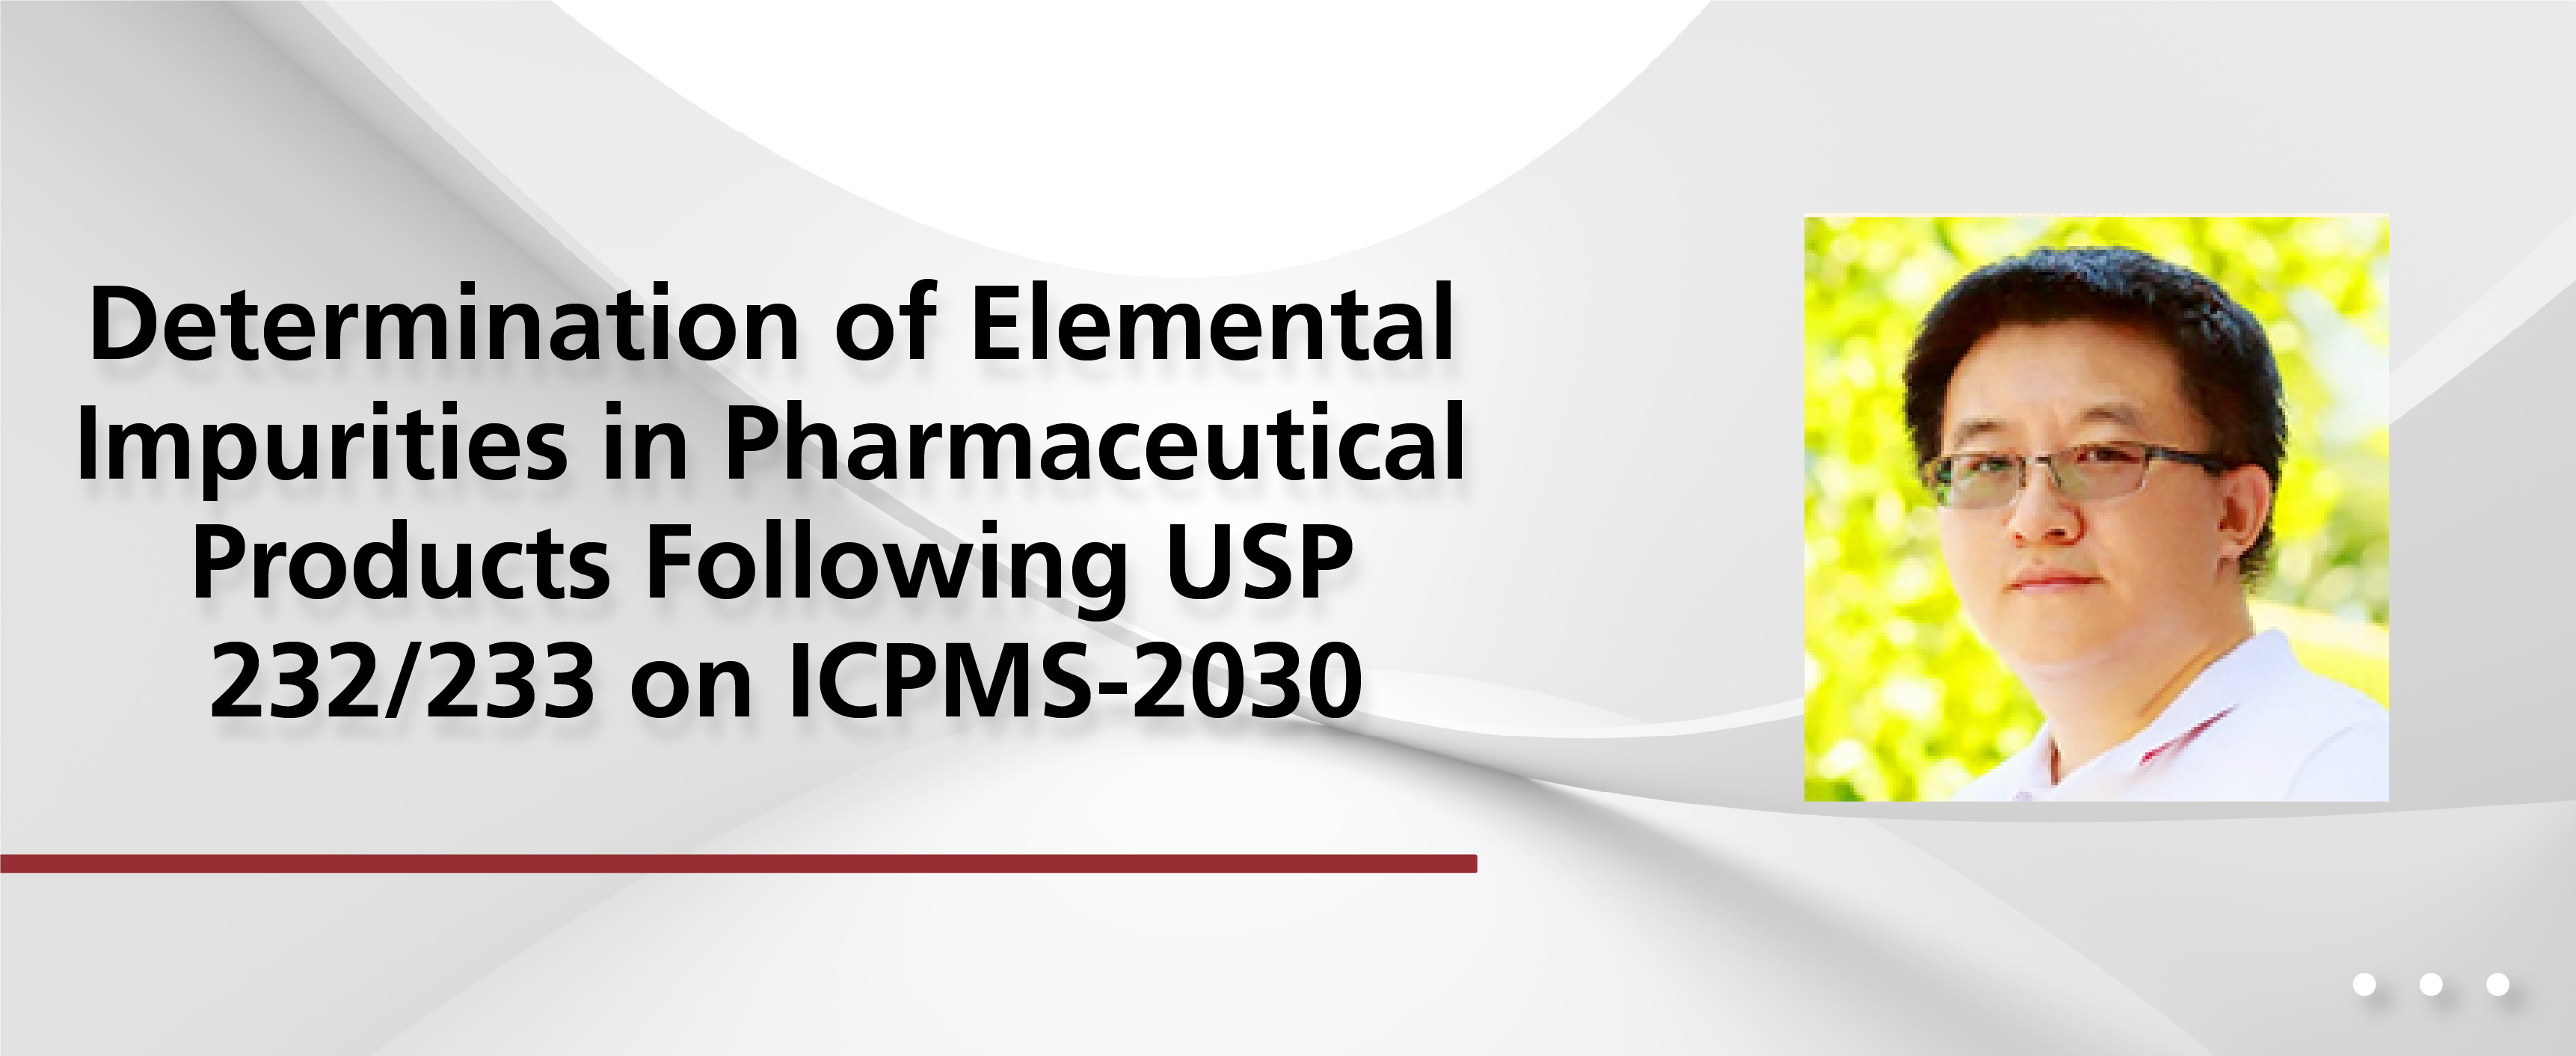 Determination of Elemental Impurities in Pharmaceutical Products Following USP 232/233 on ICPMS-2030